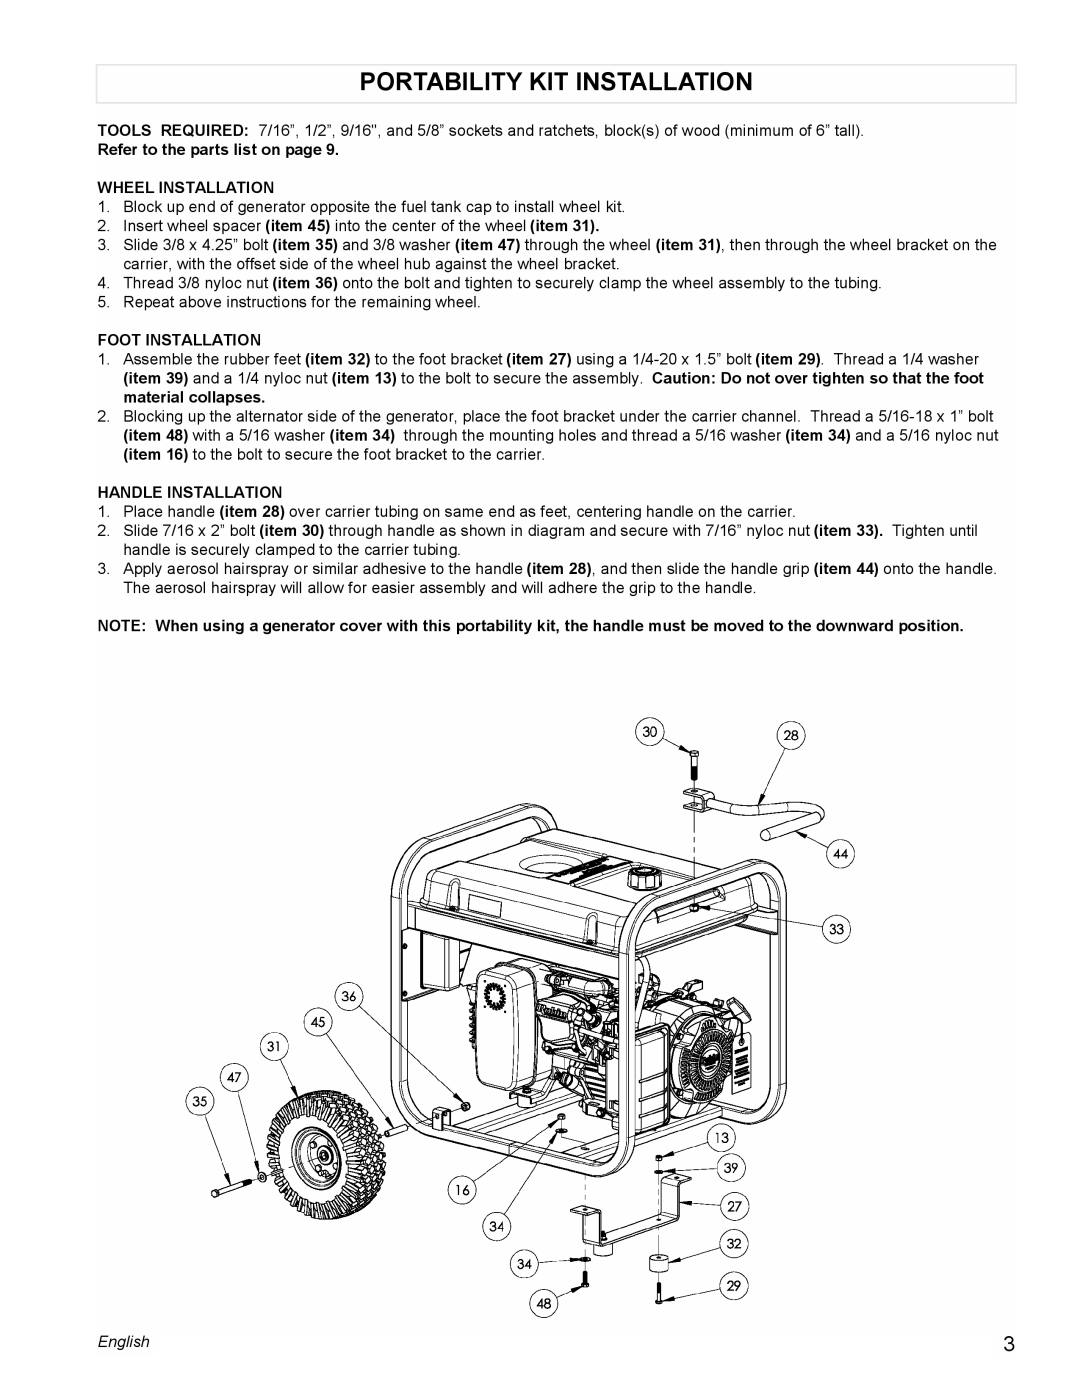 Powermate PMC435250 Portability Kit Installation, Refer to the parts list on page, Wheel Installation, Foot Installation 